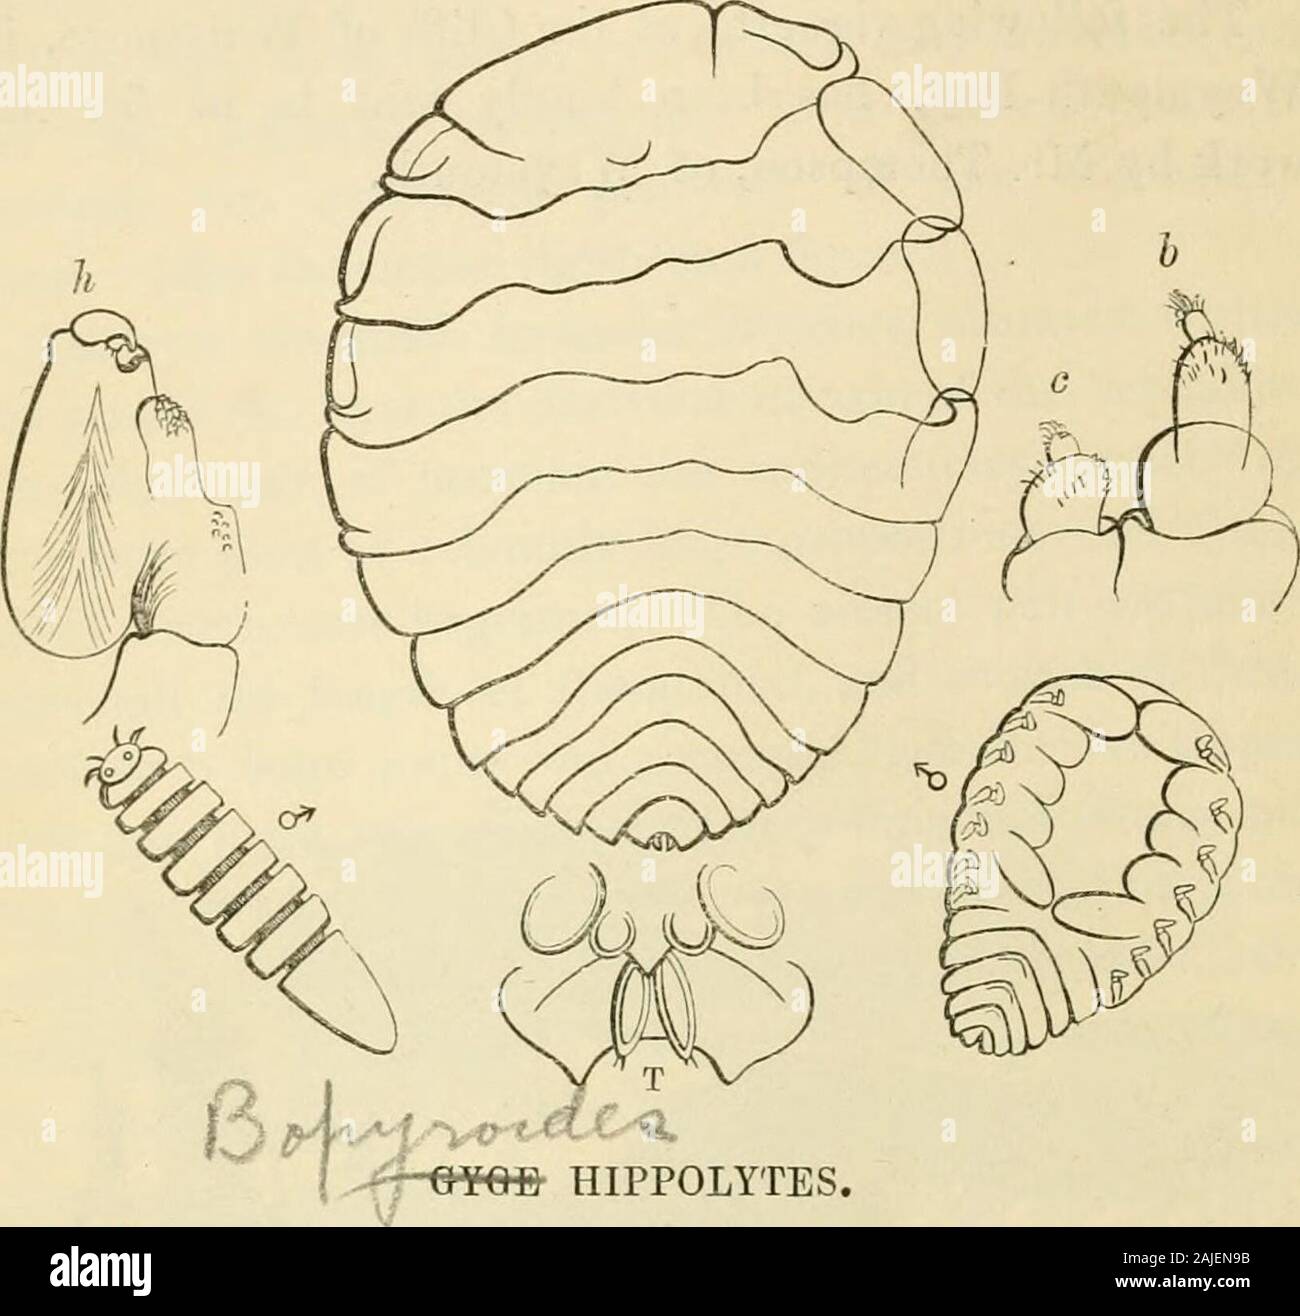 A history of the British sessile-eyed Crustacea . CLIFFS AT WHITENORE, WEYMOTITH BAY. 230 BOPYRID.E. ISOPODA.NORMJLIJ. BOPYRIDjE.. HIPPOLYTES. Male.—Sides subparallel; antennse, advanced beyond the front of the head;segments of the pleon fused into an elongated ovate mass, obtuse at theextremity. Female.—Broadly ovate, depressed, anterior portion slightly curved towardsthe left (when viewed dorsally) ; segments of the pereion and pleon distinct,sub-continuous; terminal segment apparently notched at the tip, owing tothe projection of the posterior pair of pleopoda. Length :—Female, seven-twenti Stock Photo